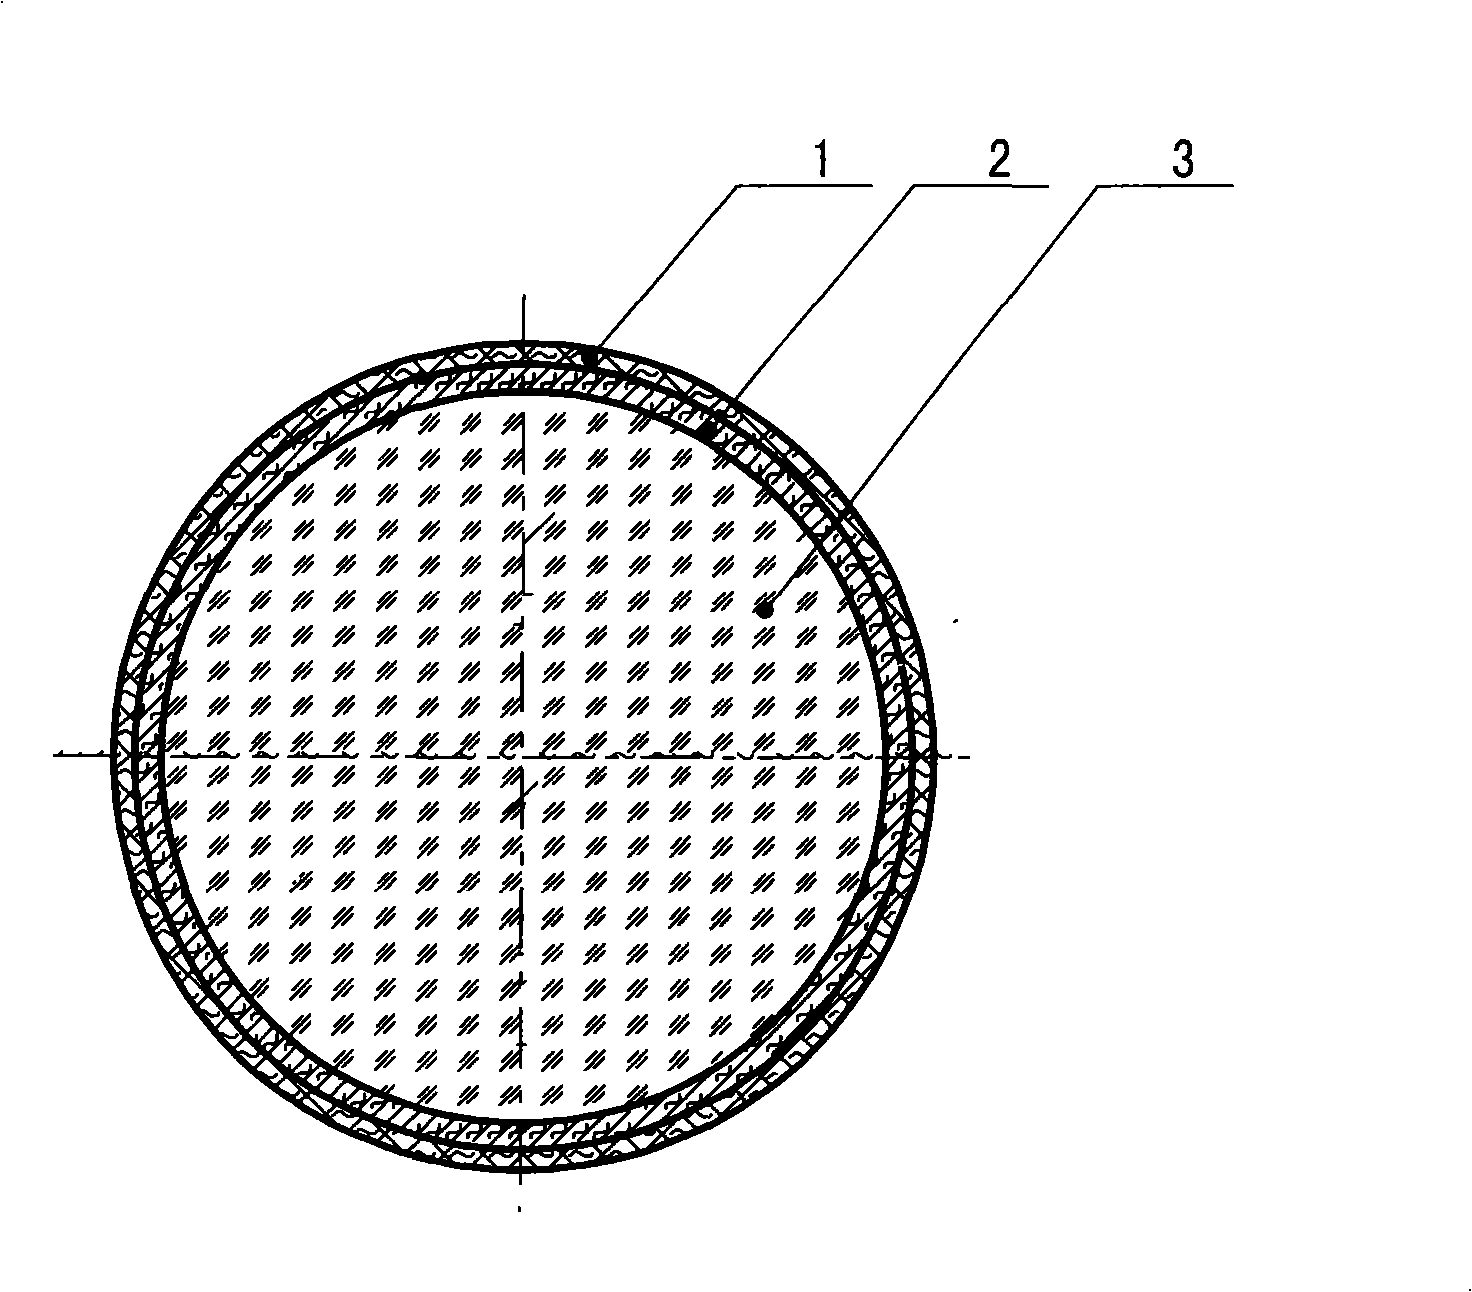 Glass microballoon with dual-layer function membrane